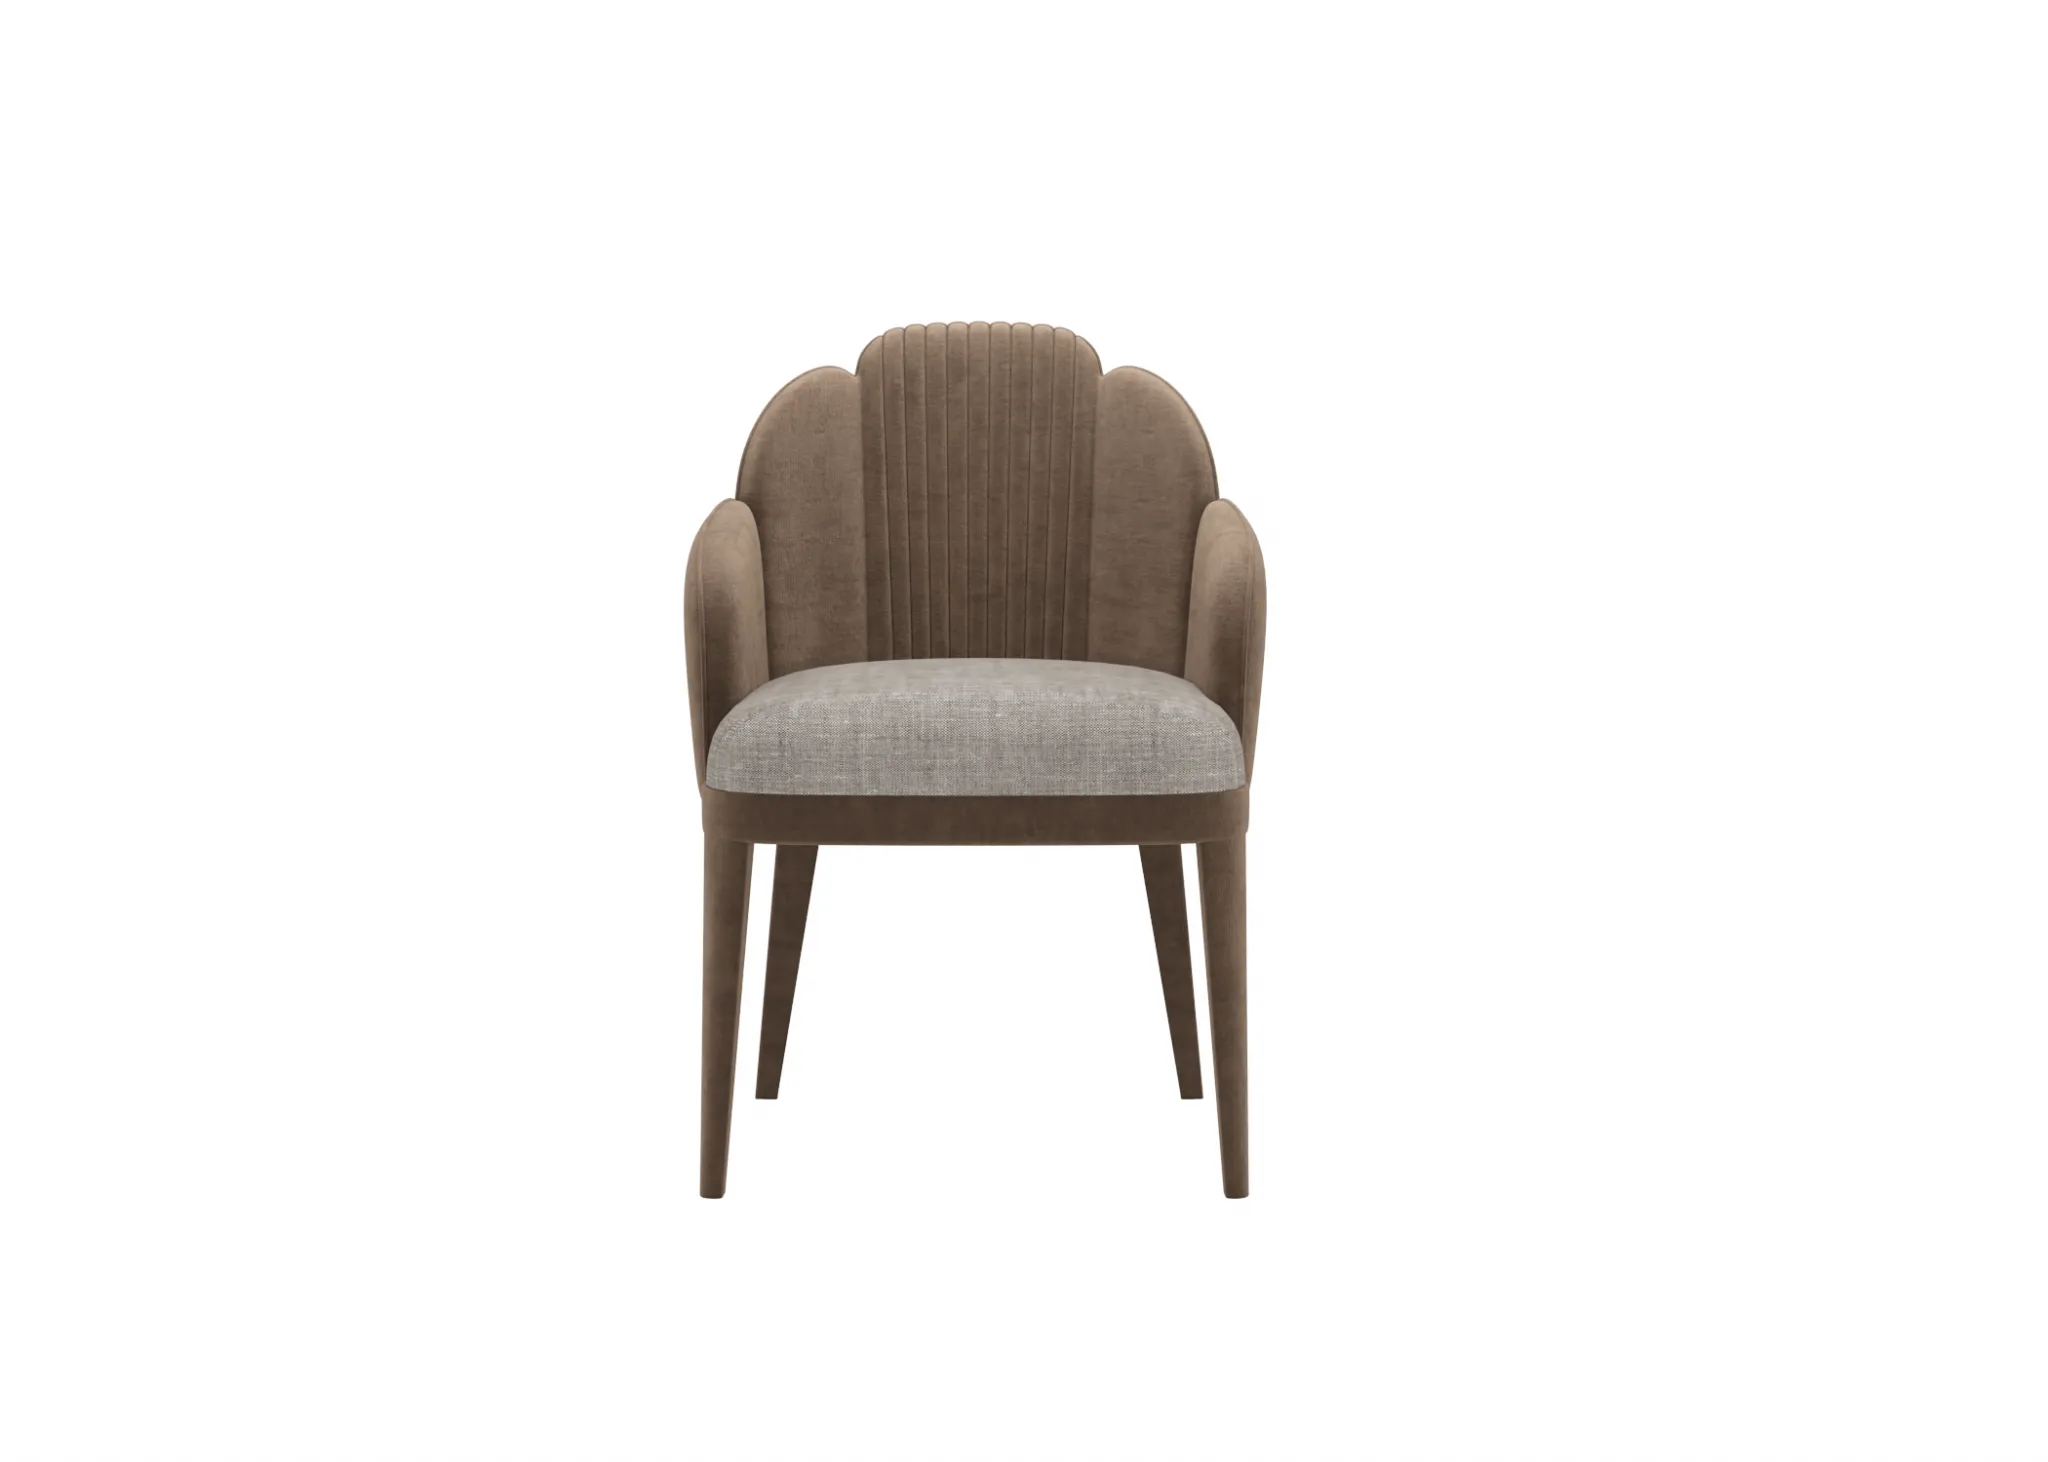 FURNITURE 3D MODELS – CHAIRS – 0426